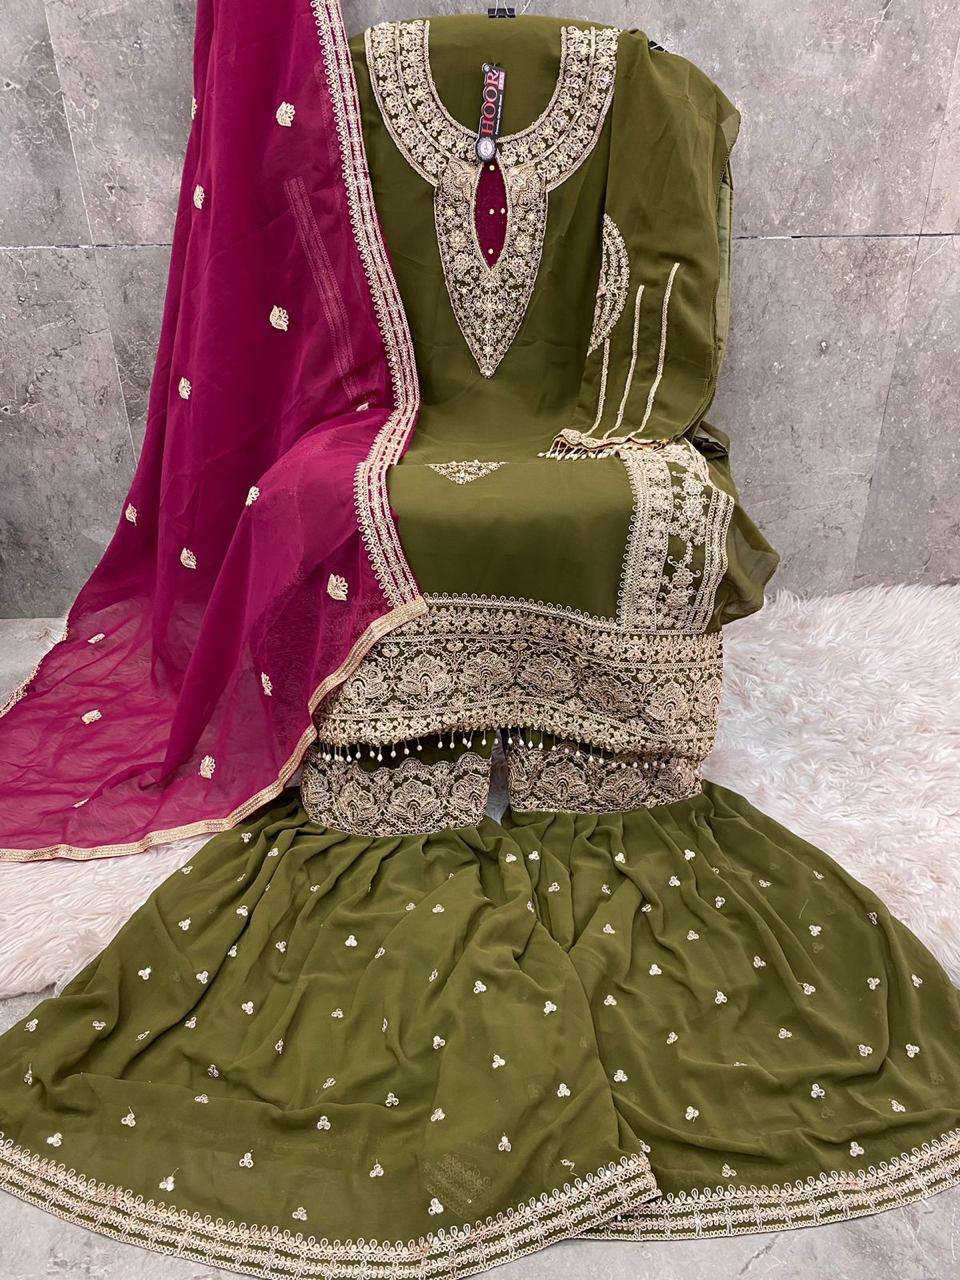 hoor tex design number h 253 a n b pakistani semi stiched dresses top fox georgette bottom georgette with full stitched free size inner santoon dresses 